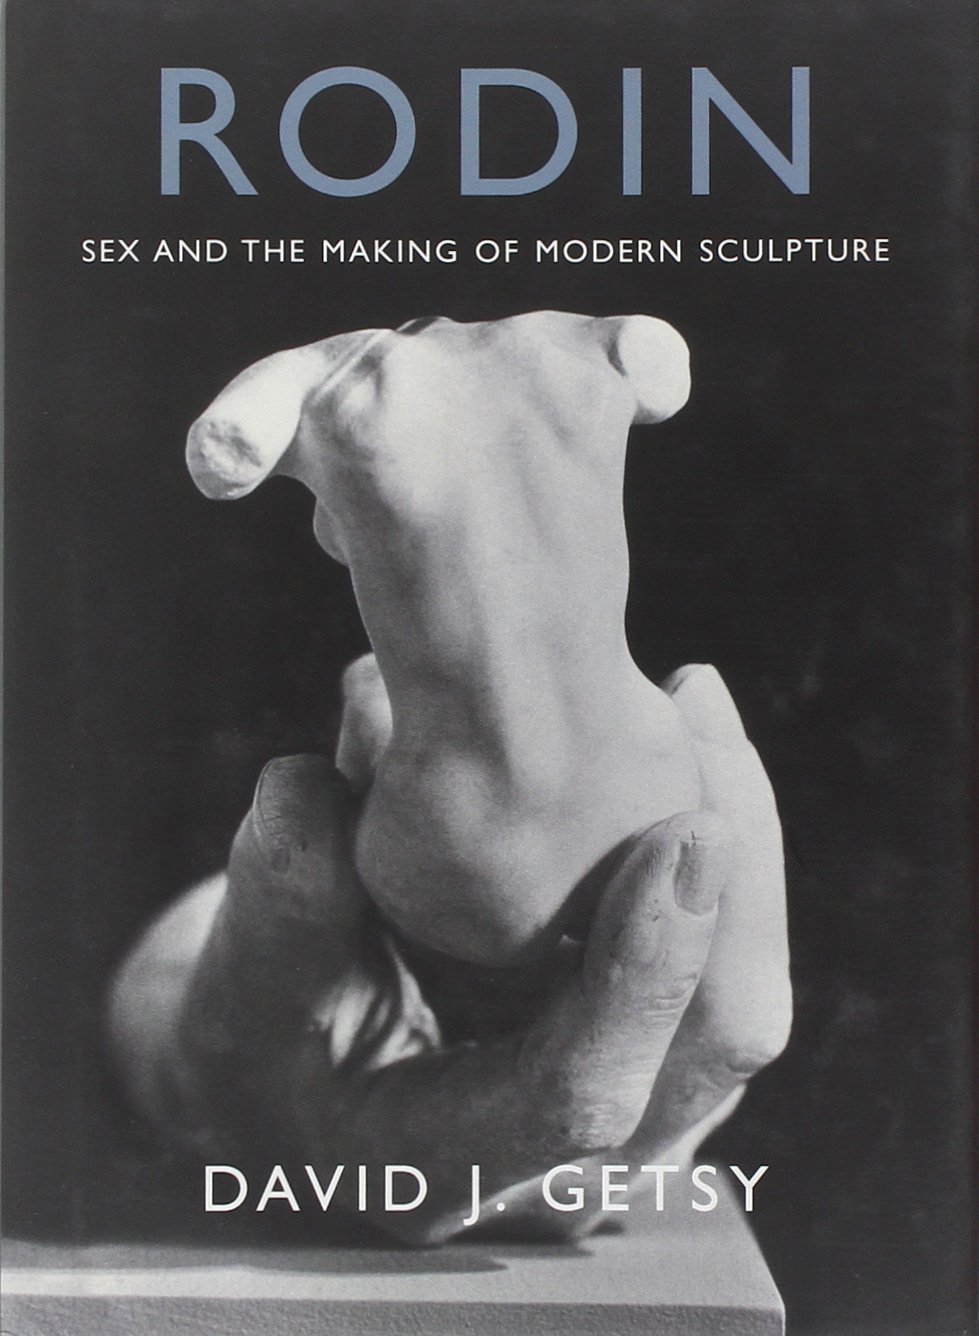 Rodin: Sex and the Making of Modern Sculpture